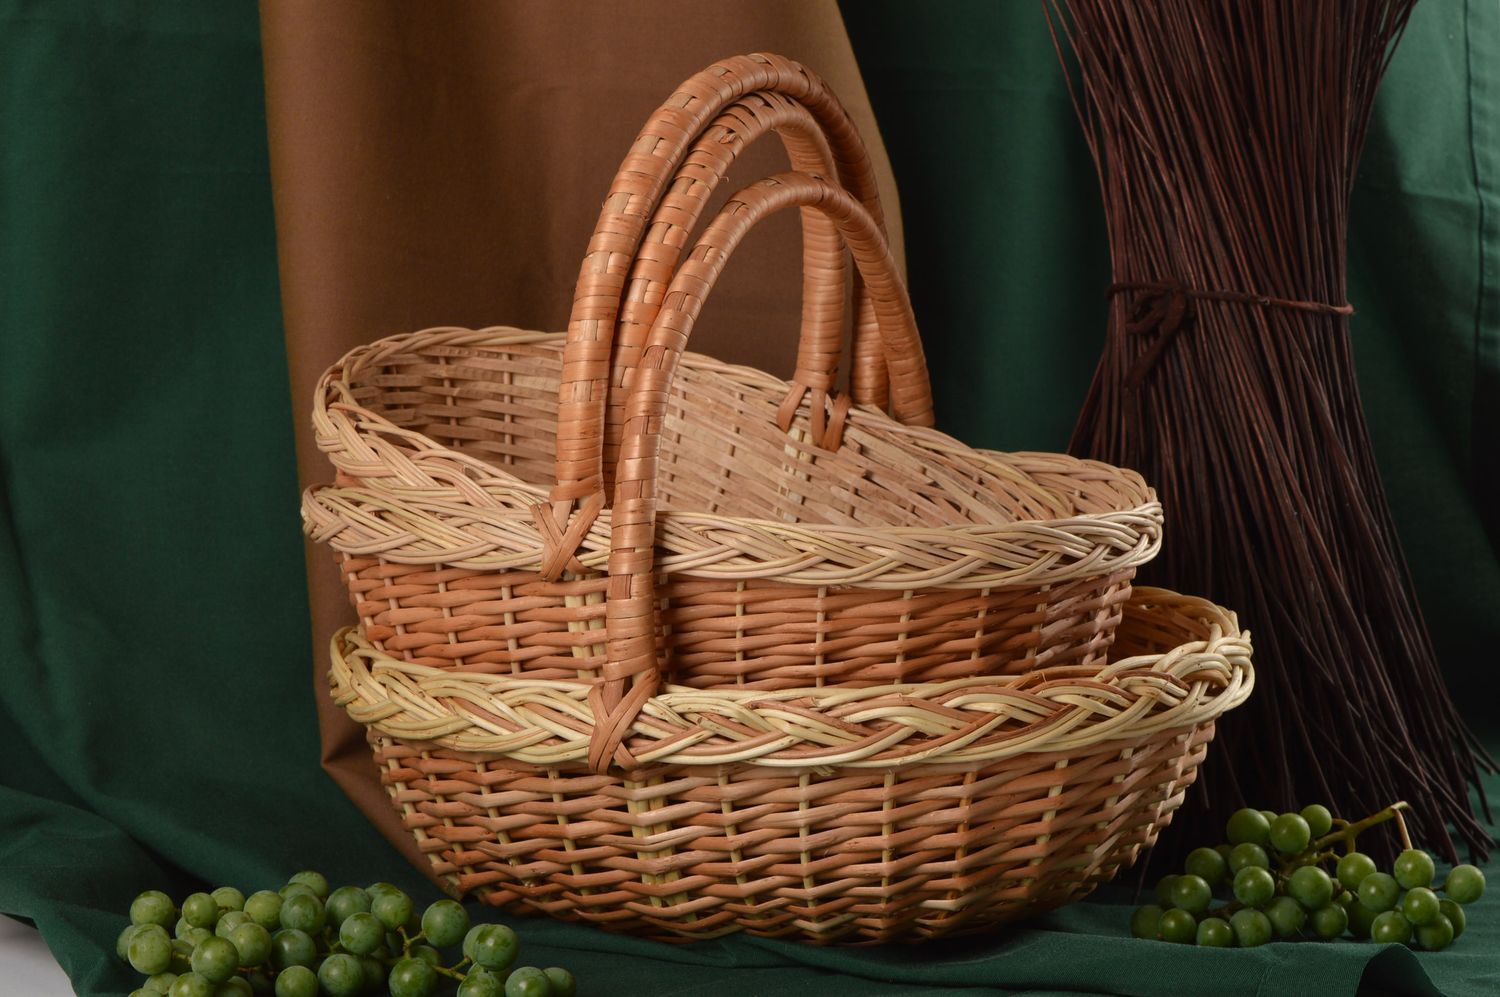 Beautiful handmade Easter basket woven basket design home goods small gifts photo 1